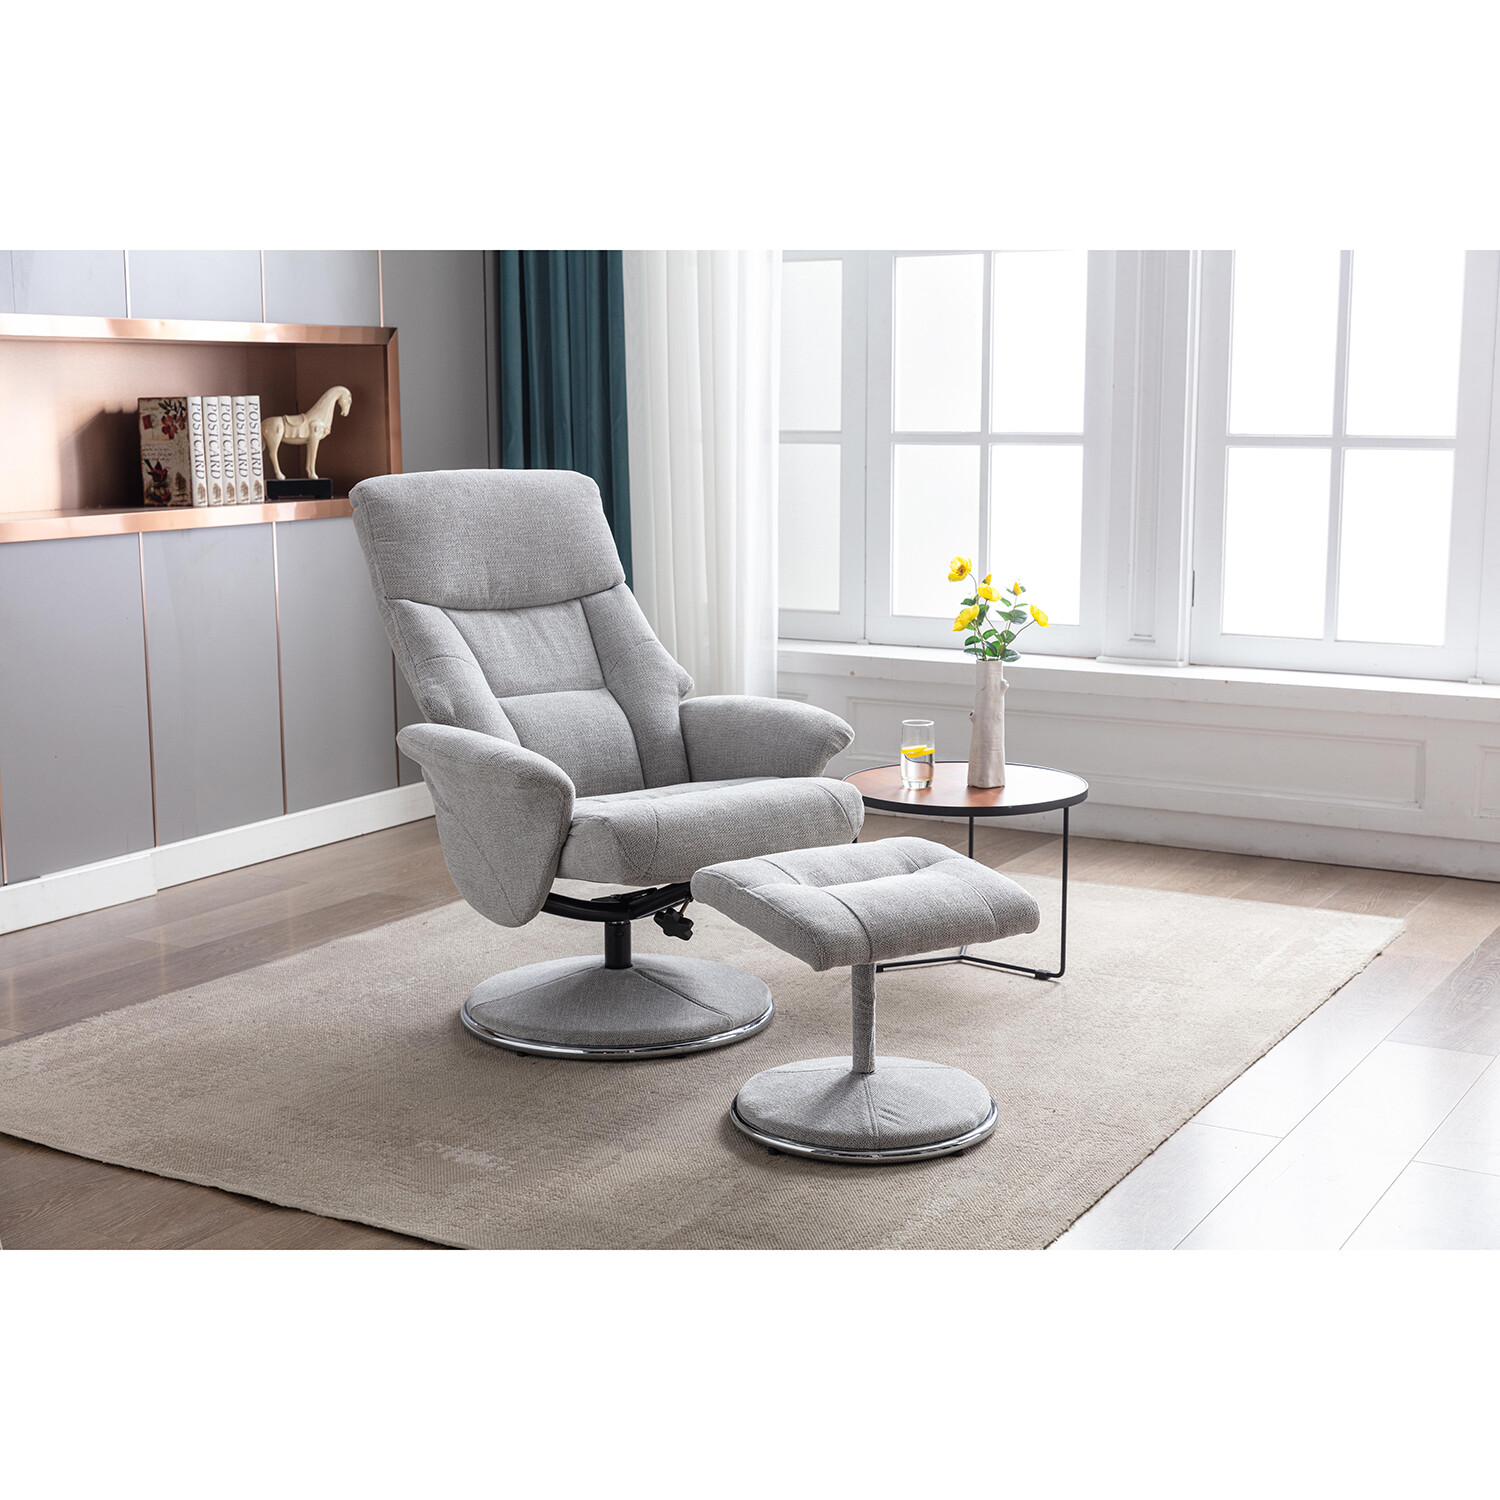 Madrid Grey Fabric Swivel TV Chair with Footrest Image 6